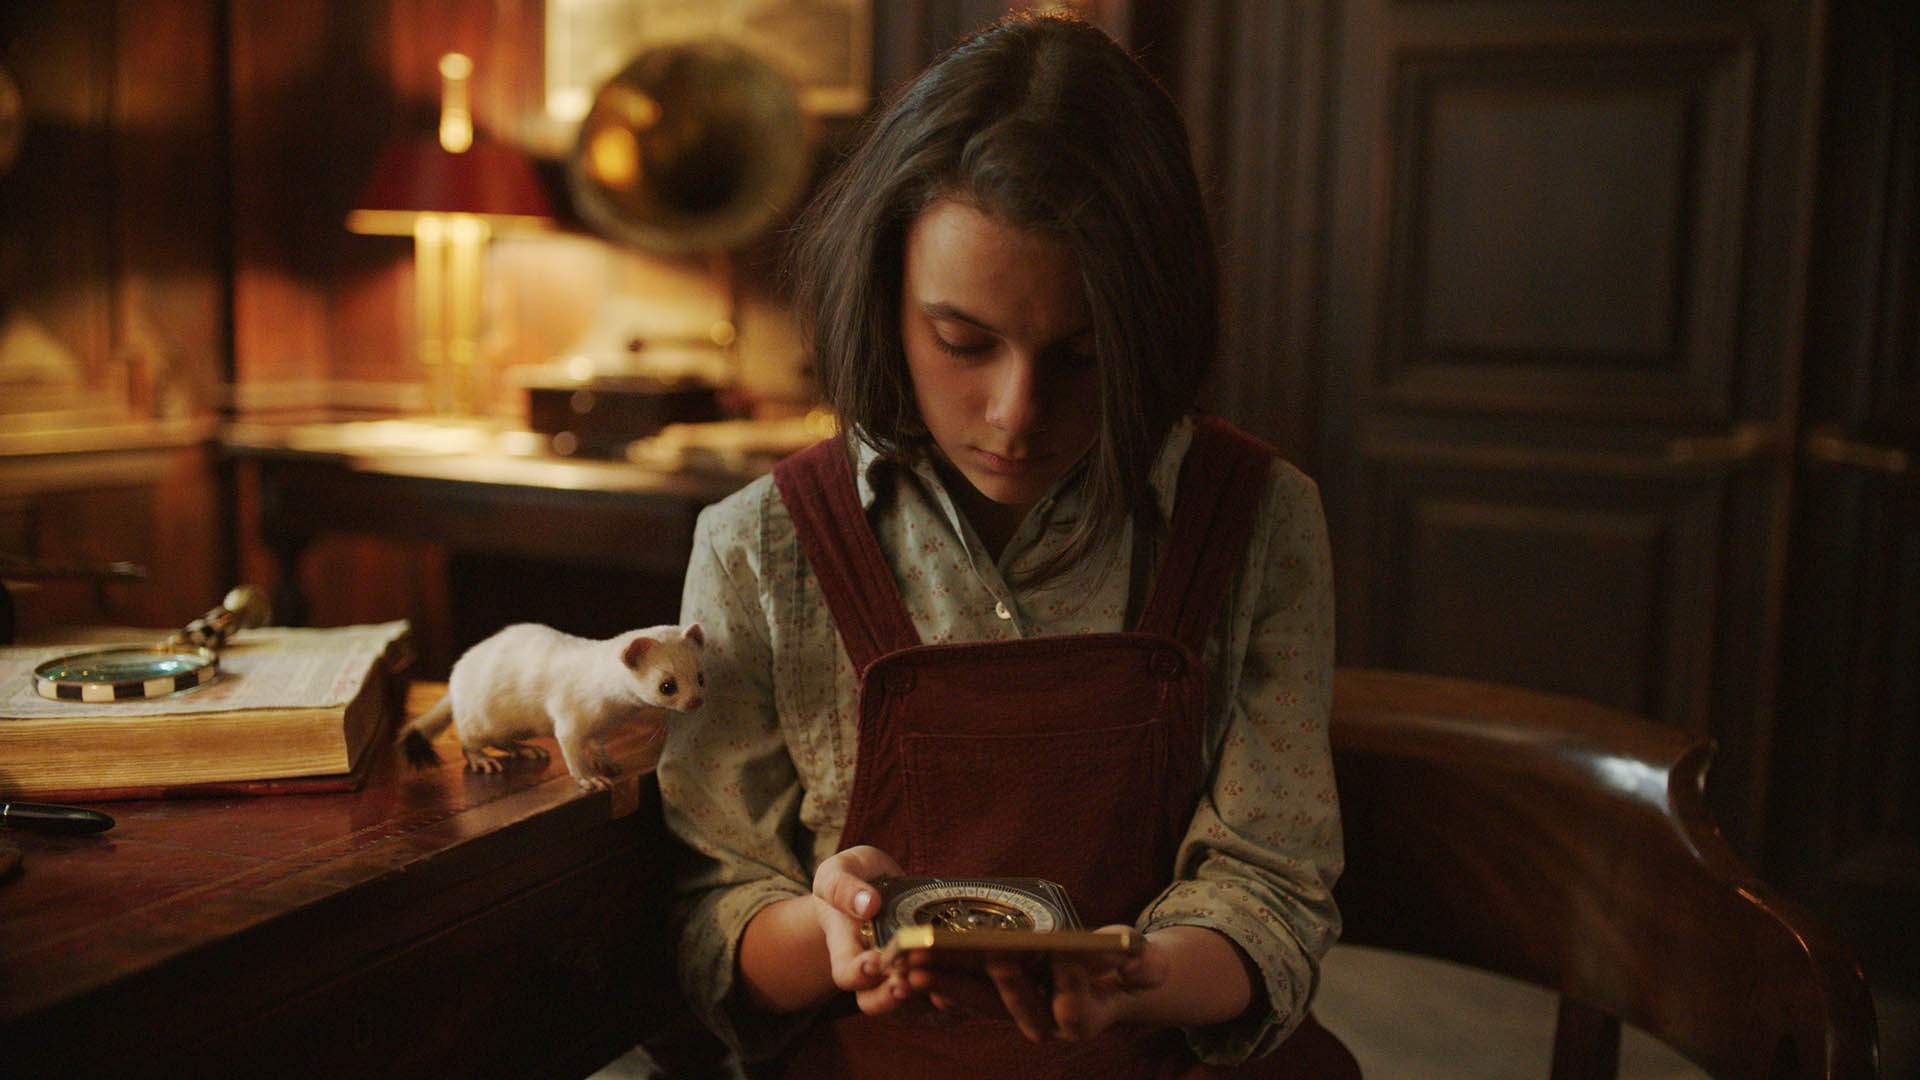 HBO Has Dropped the Tense Full Trailer for Its Next Big Fantasy Series, 'His Dark Materials'